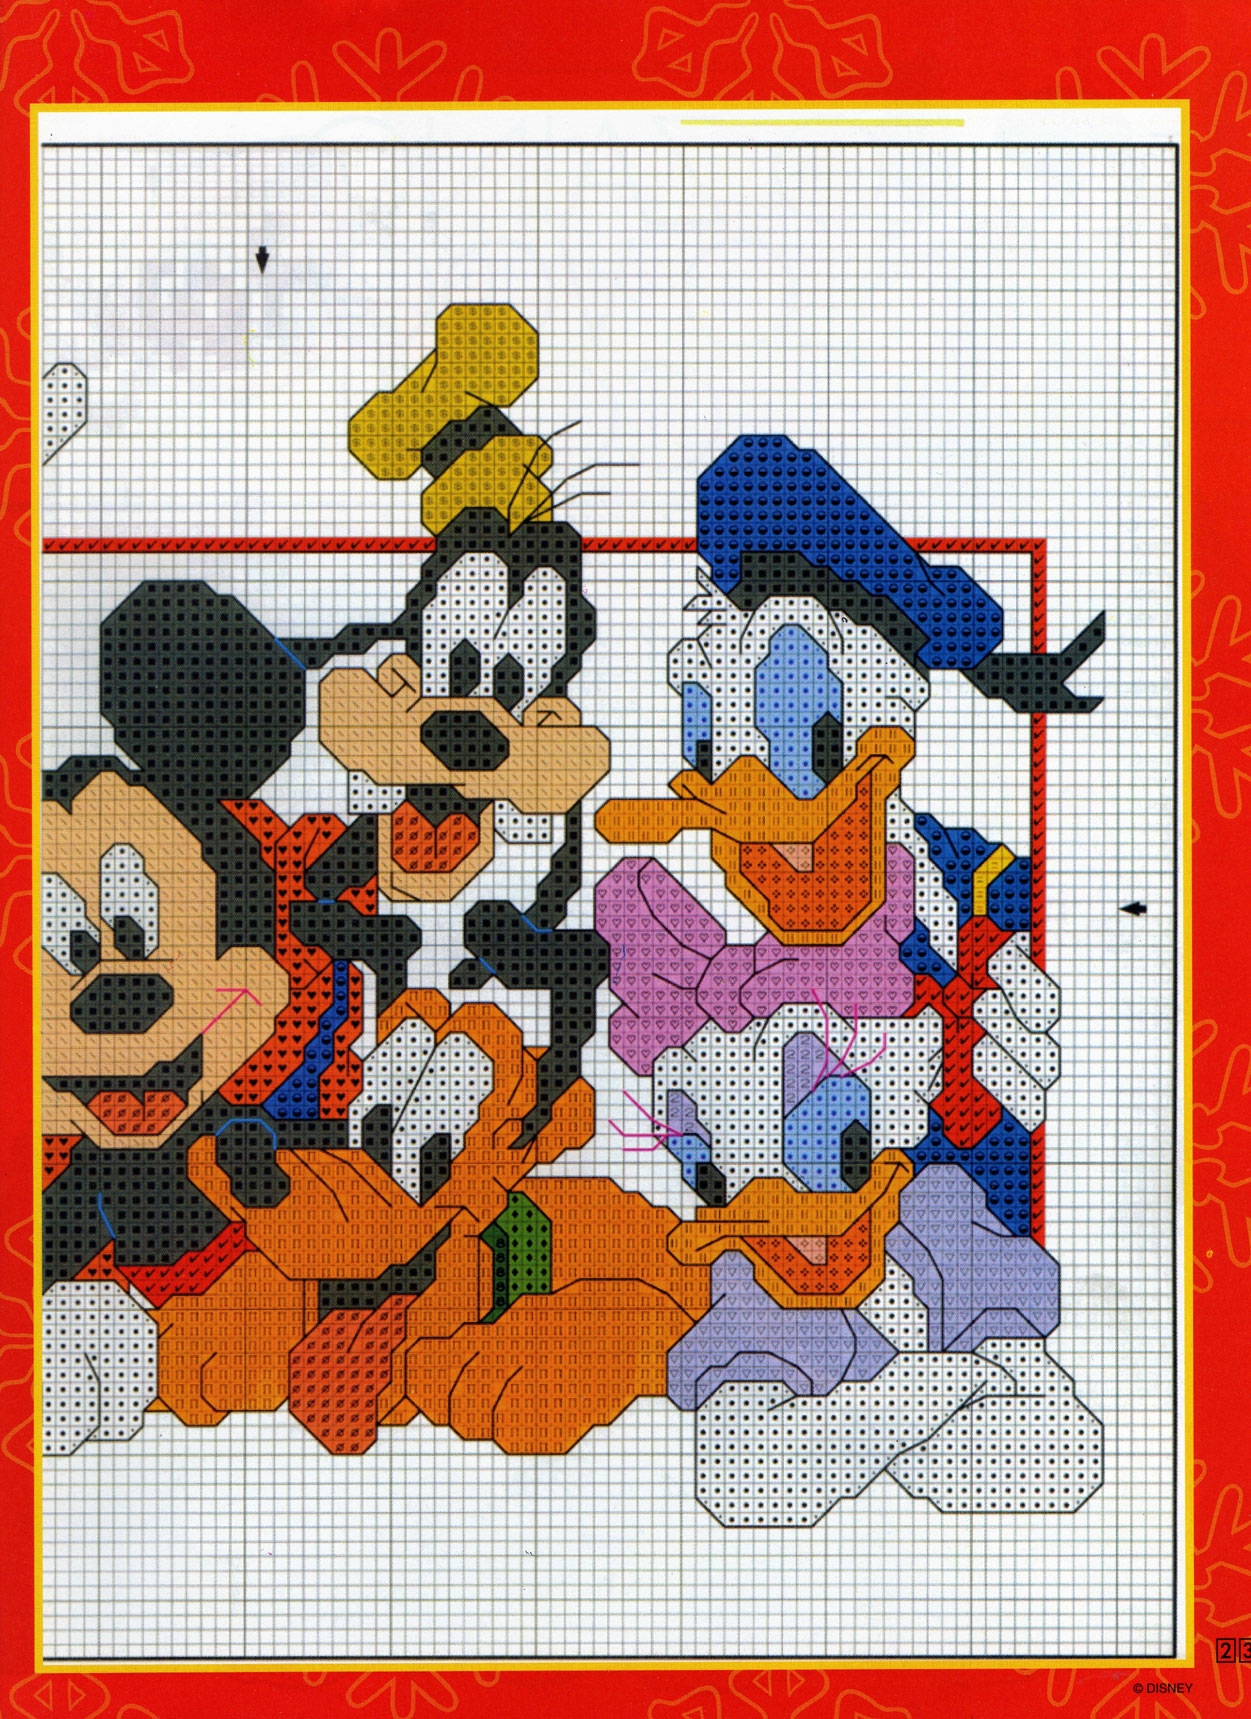 Cross stitch pattern with Disney characters (2)